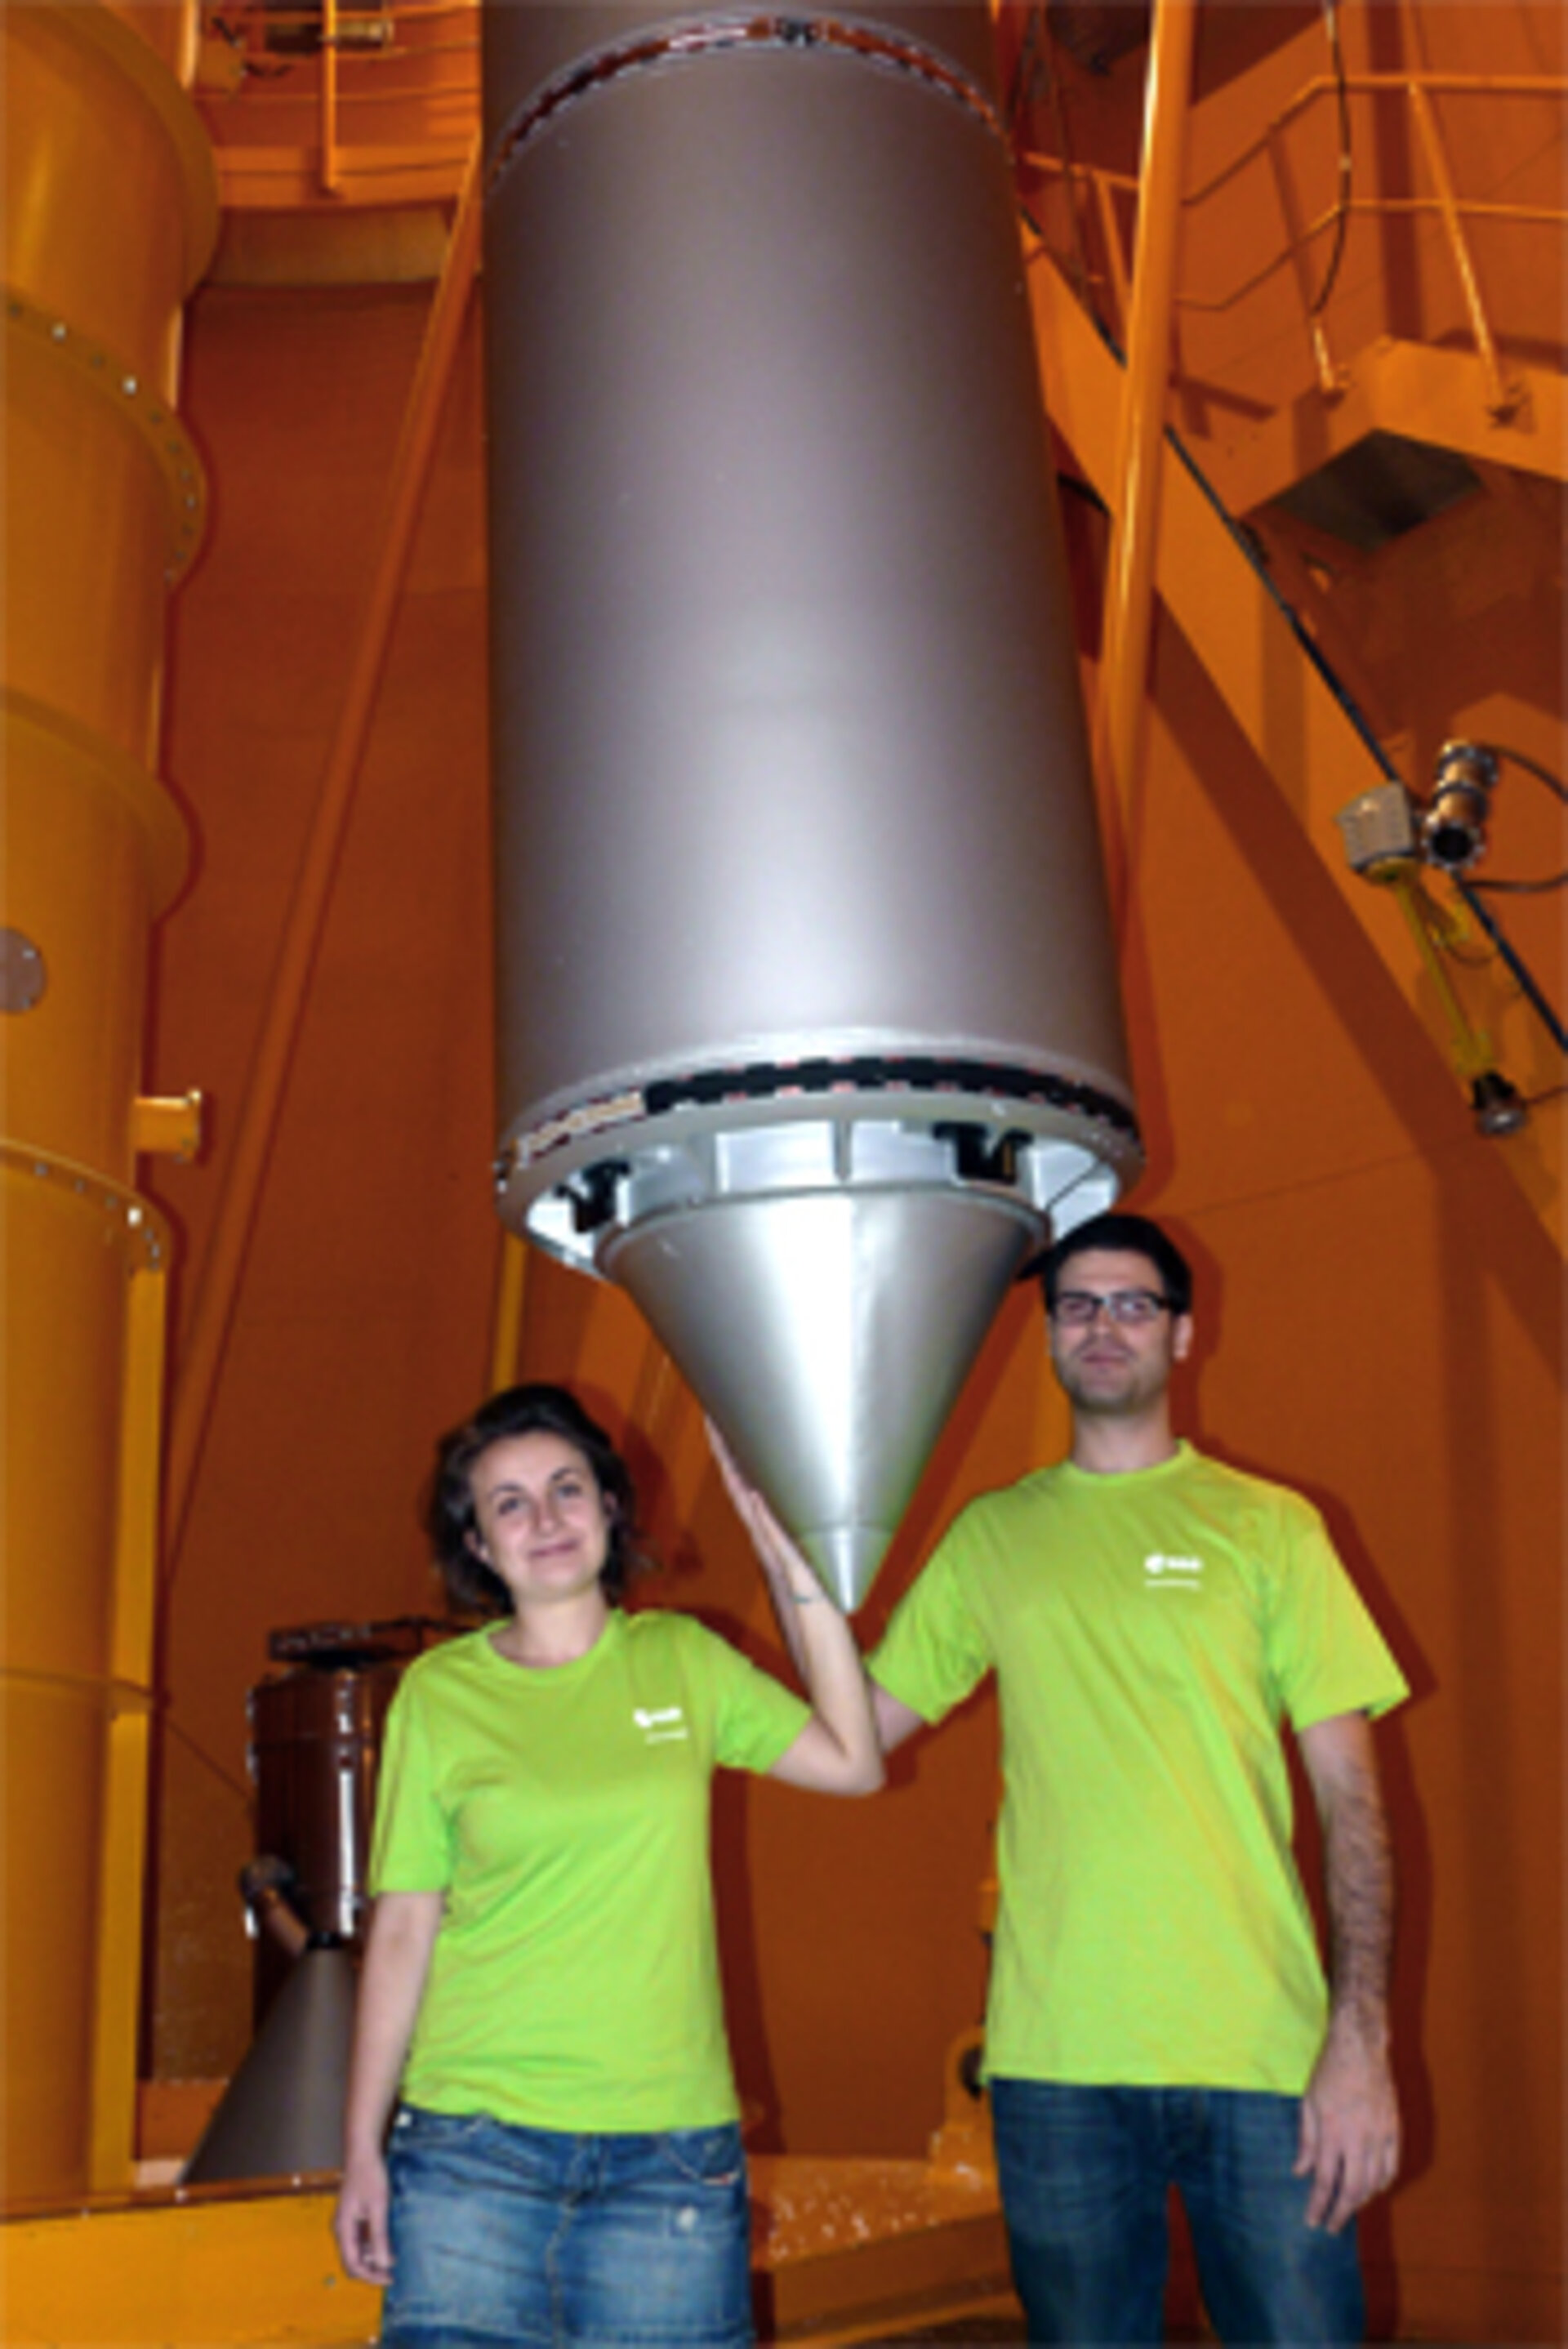 The team with the drop capsule